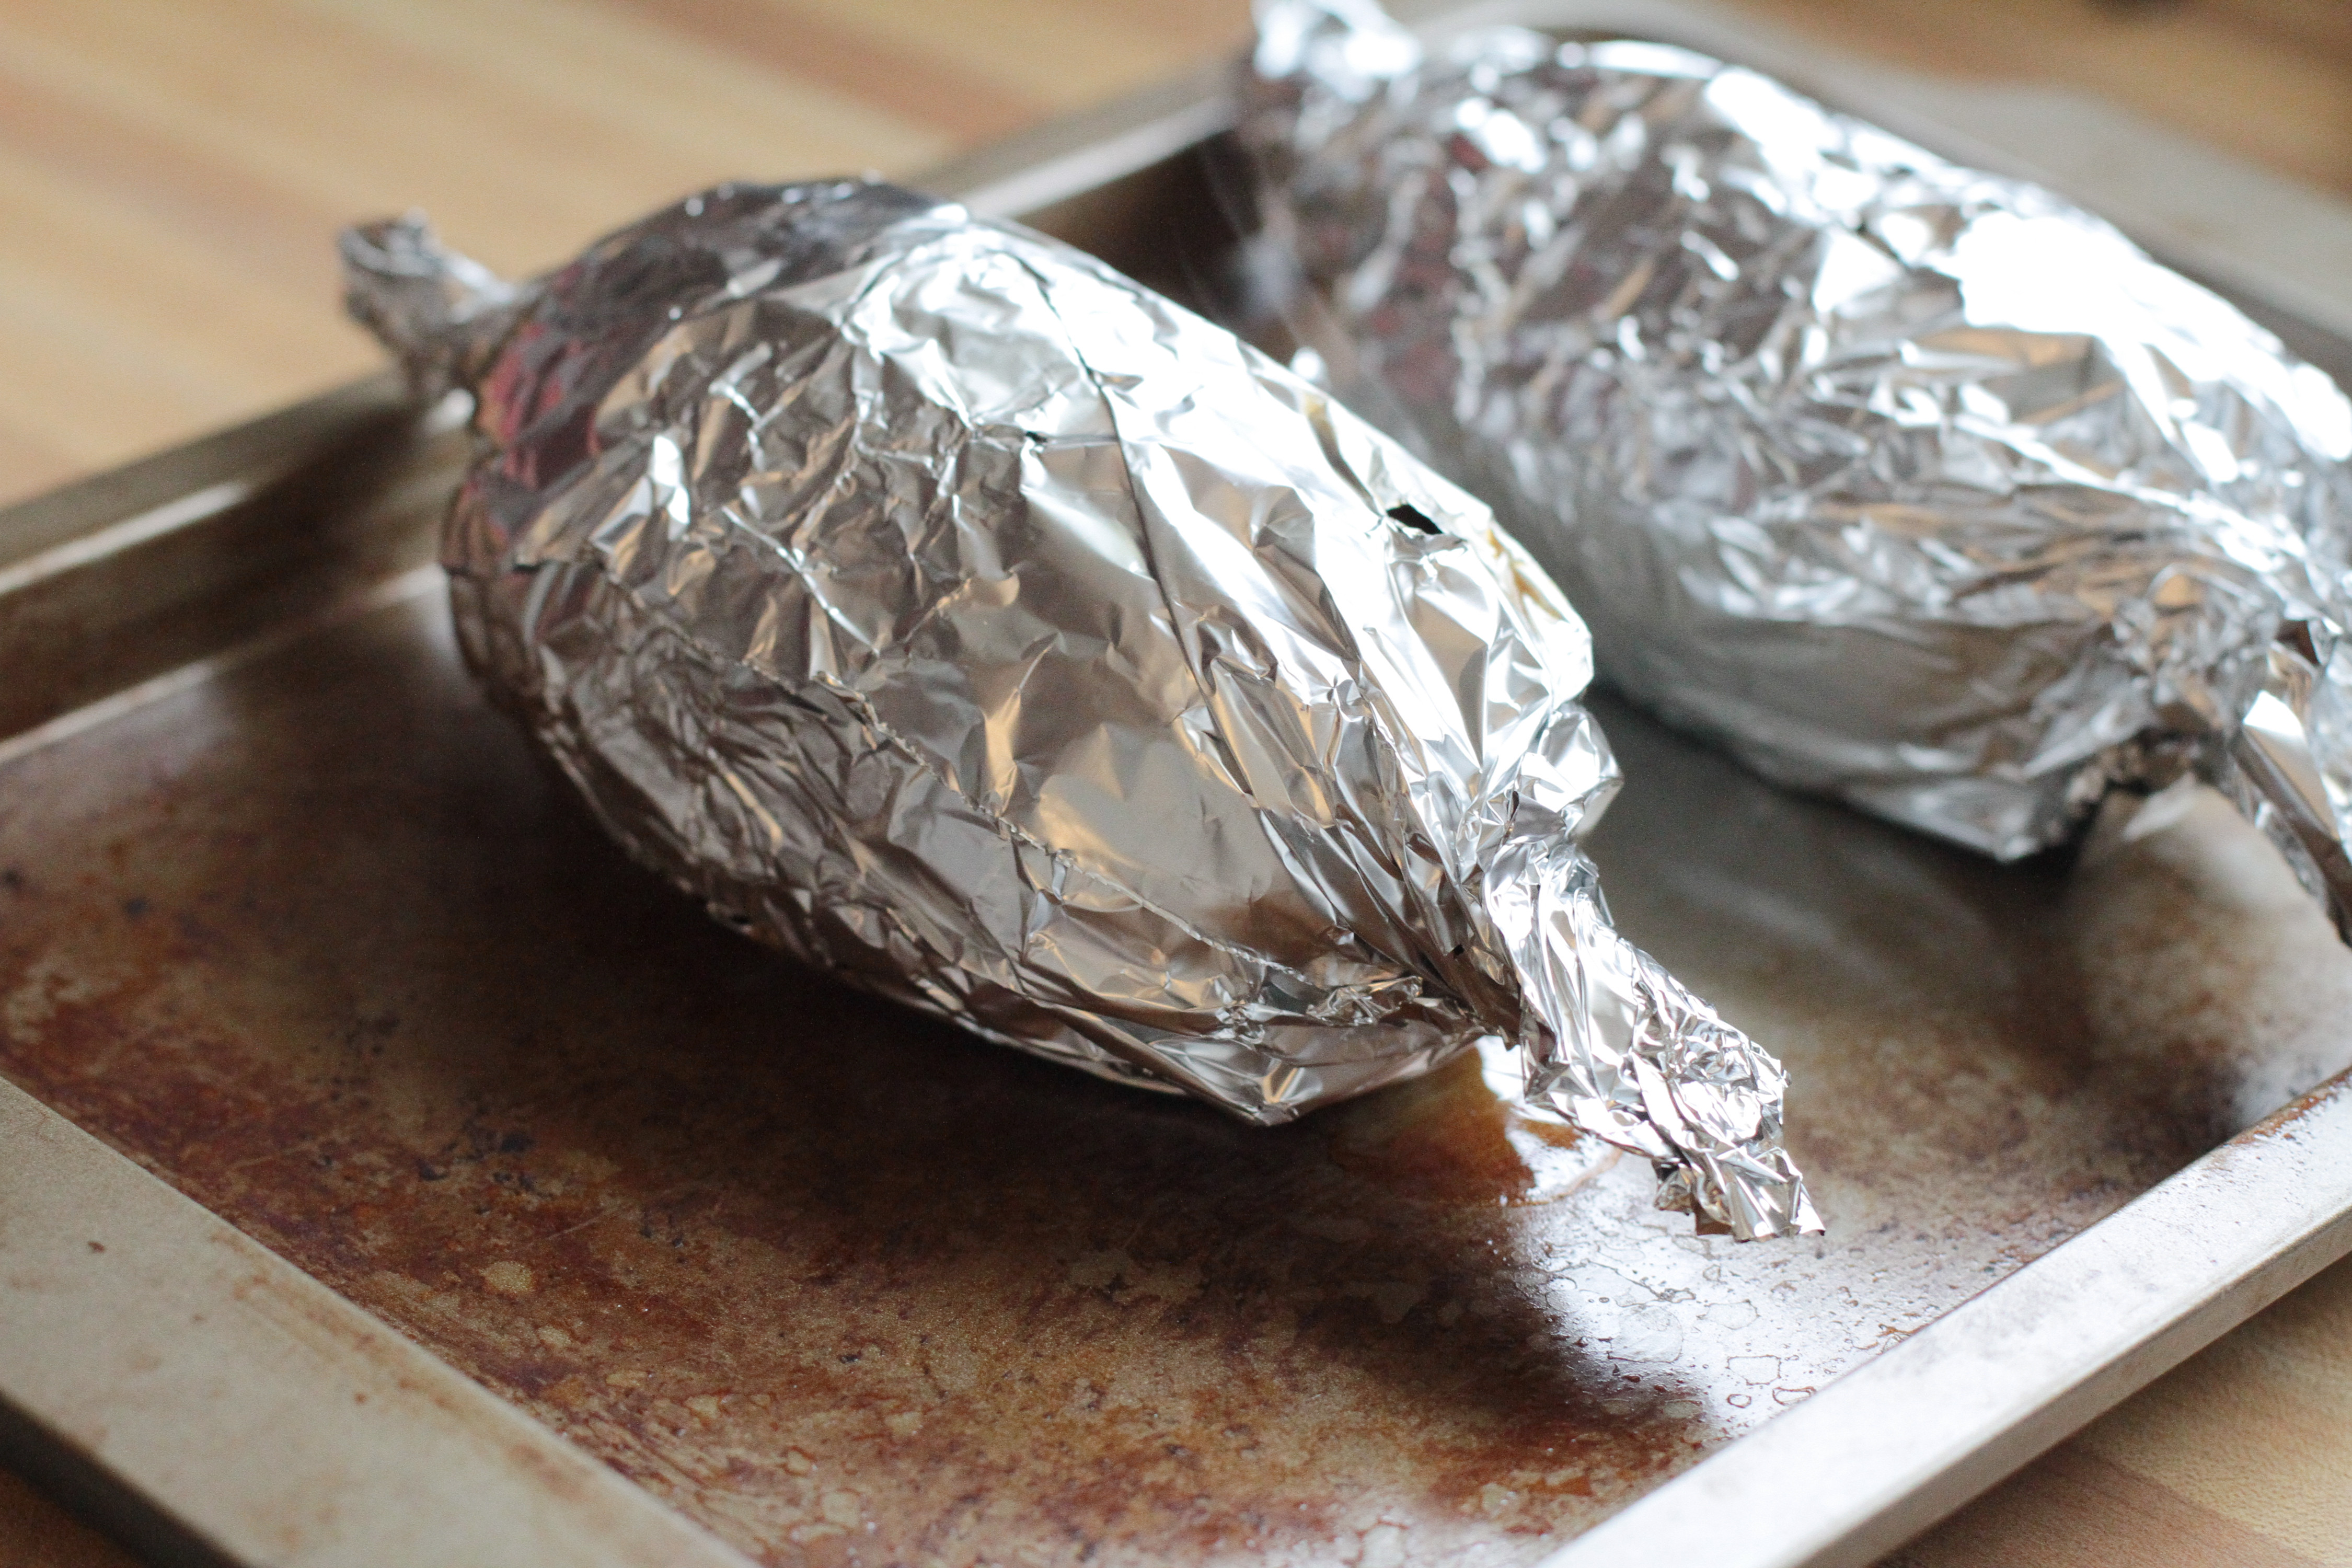 Baked Potato In Oven Wrapped In Foil
 How to Cook Sweet Potatoes in Aluminum Foil in the Oven